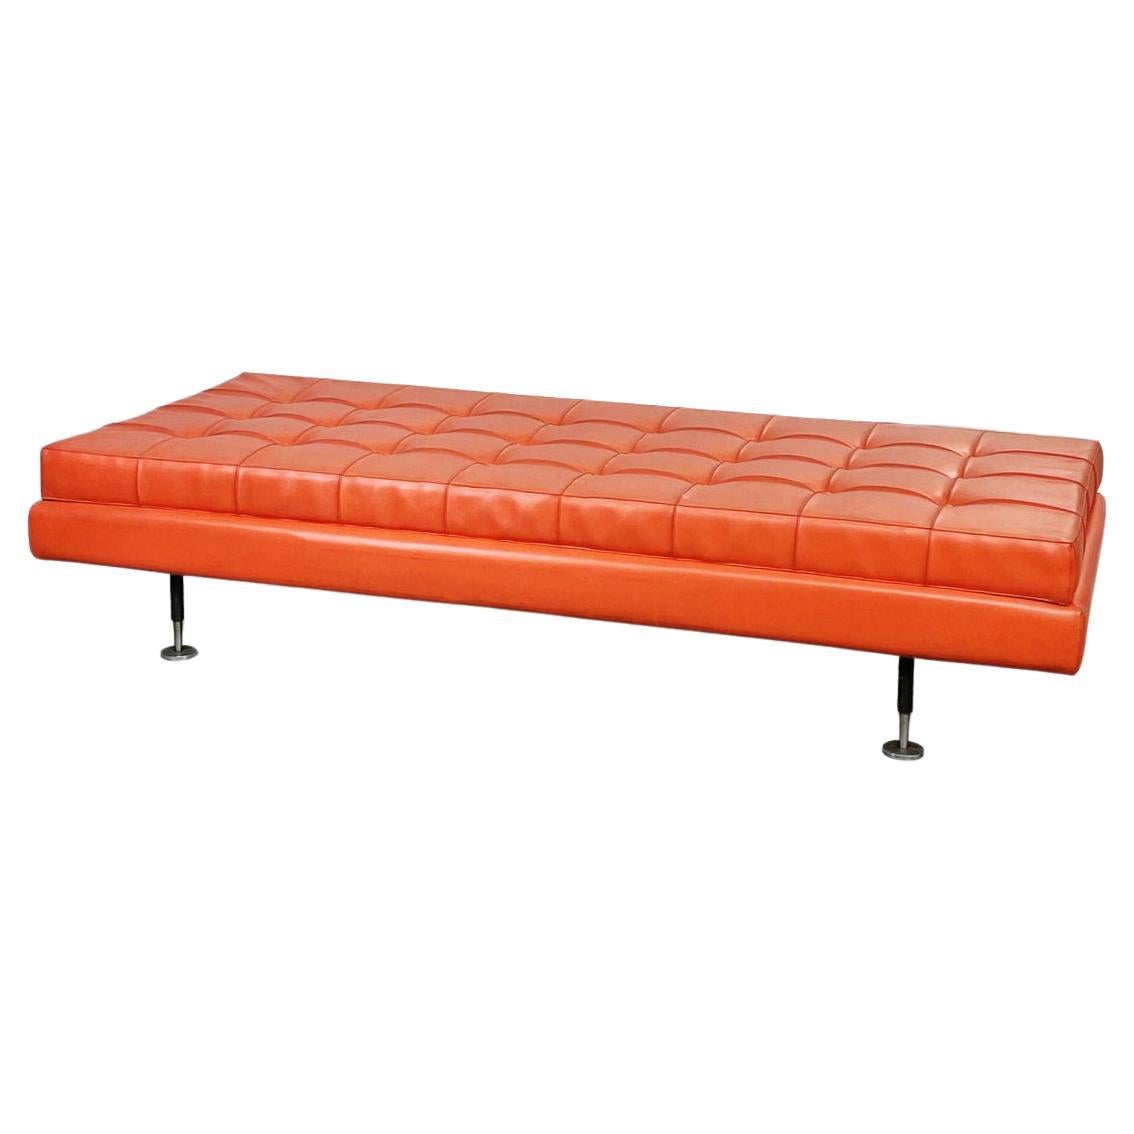 Italian Mid-Century Modern Orange Red Leather Daybed, 1970s